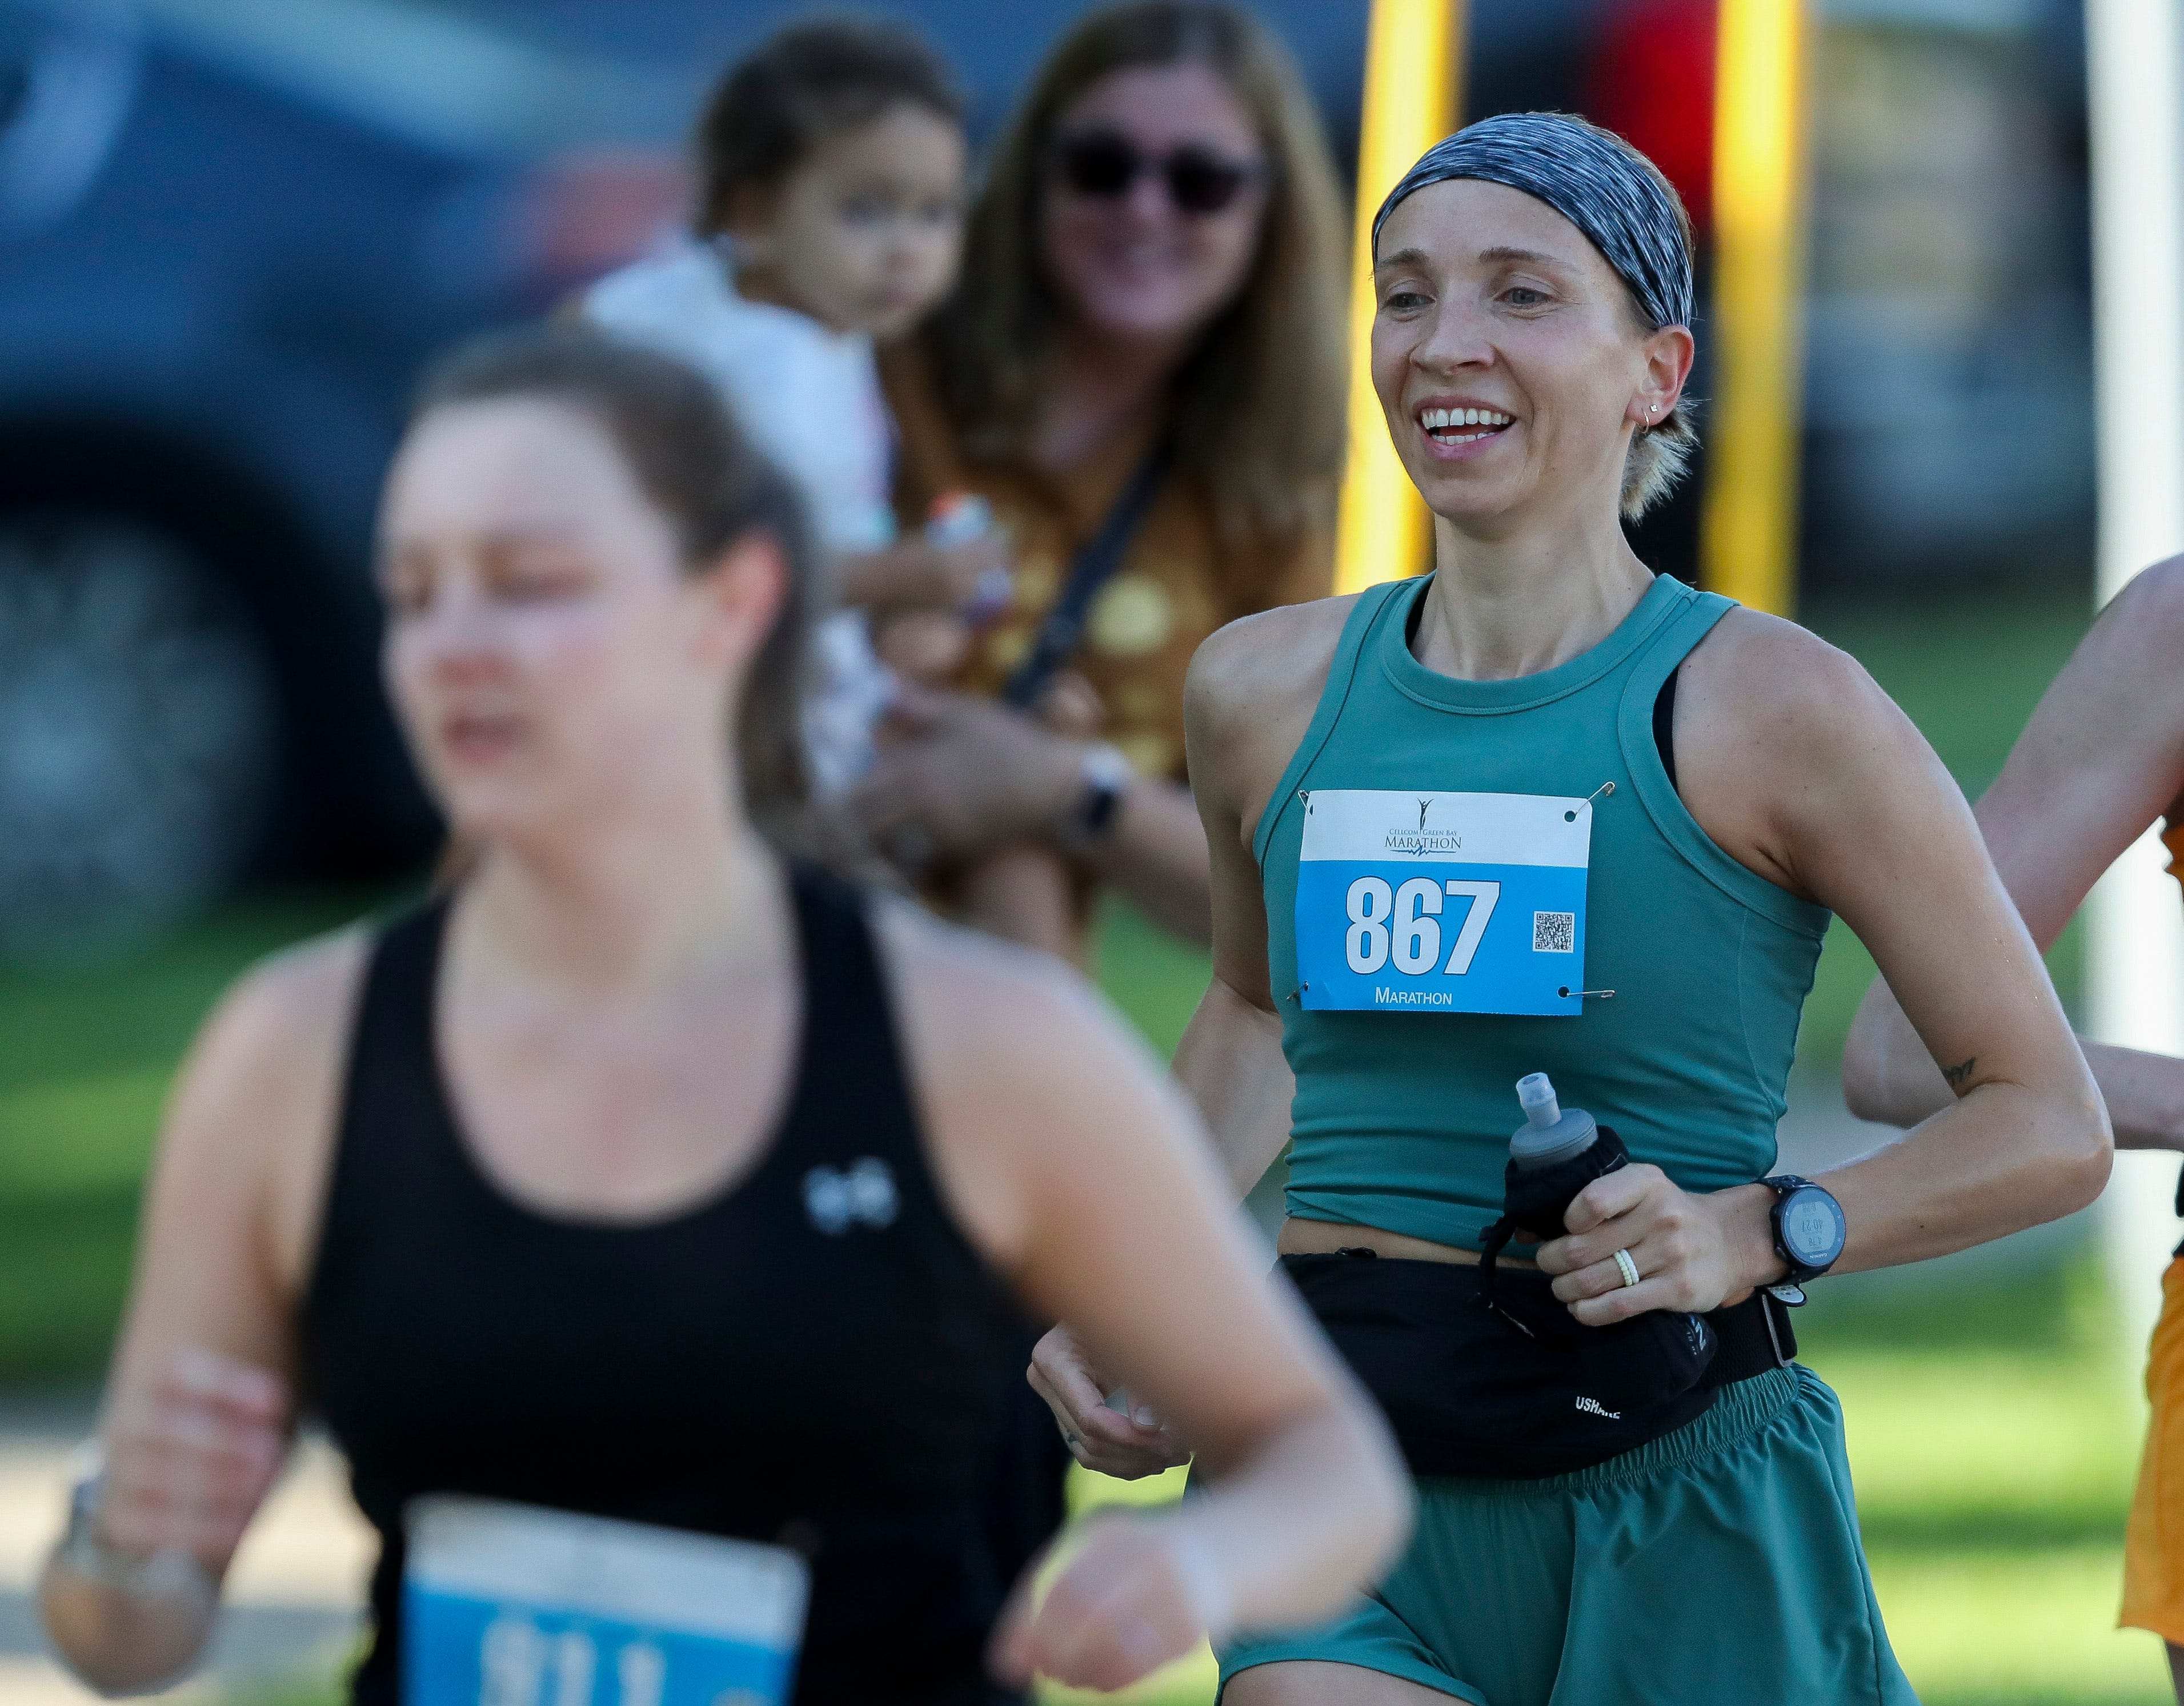 After collapsing at Cellcom Green Bay Marathon finish 12 years ago, runner gets perfect ending in event's final race